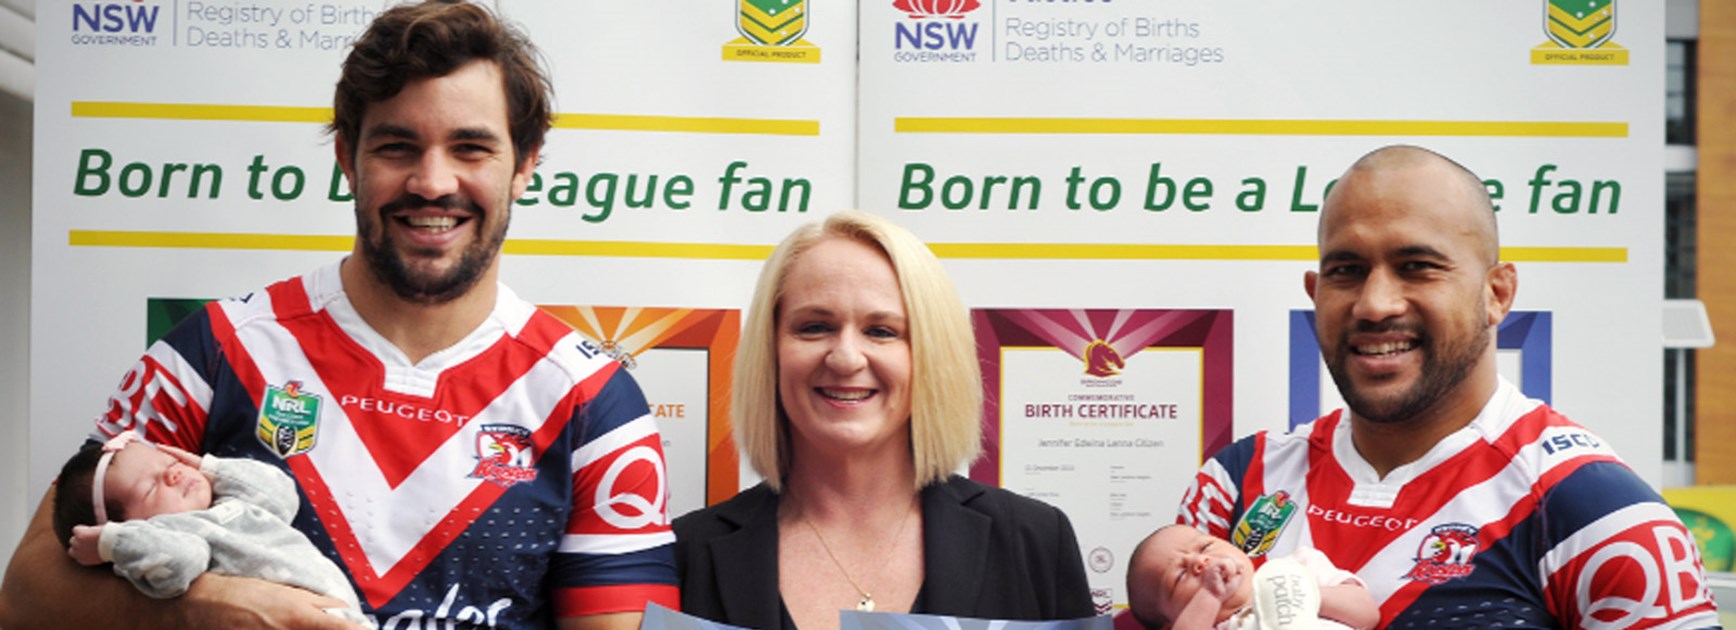 Roosters players Aidan Guerra, Sam Moa and Births Deaths and Marriages Registrar Amanda Ianna.